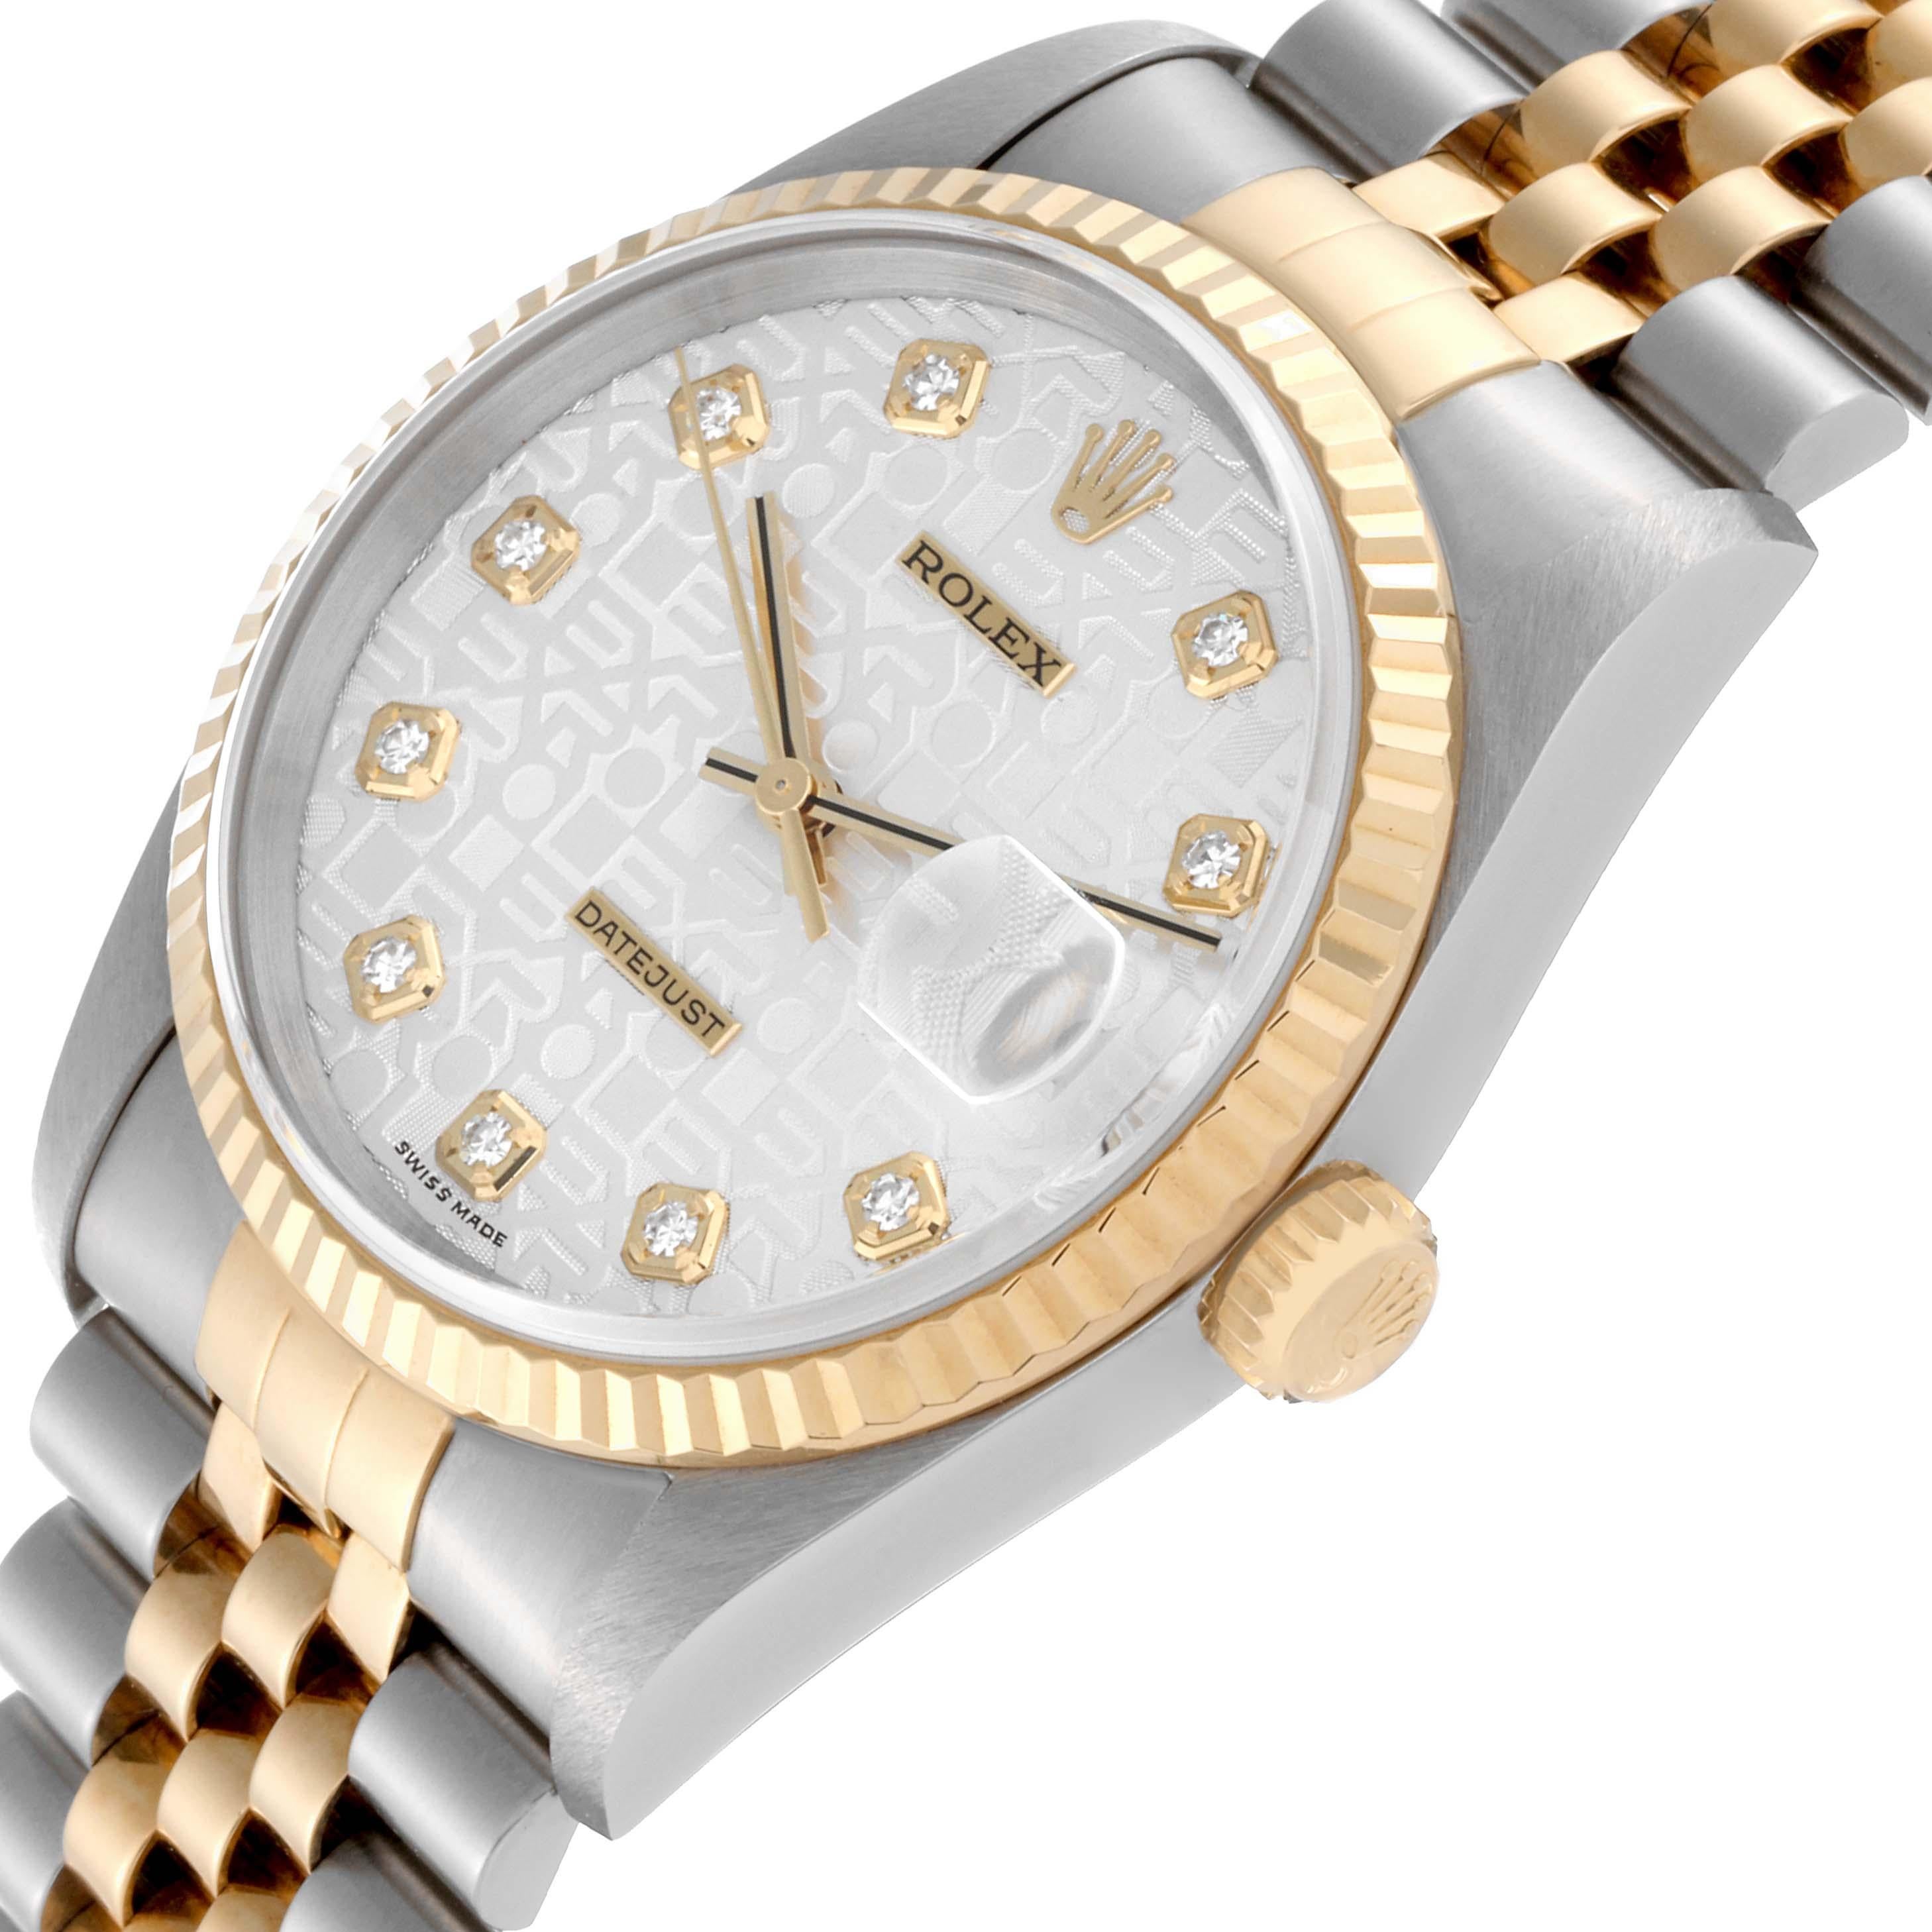 Rolex Datejust Anniversary Diamond Dial Steel Yellow Gold Watch 16233 Box Papers 1